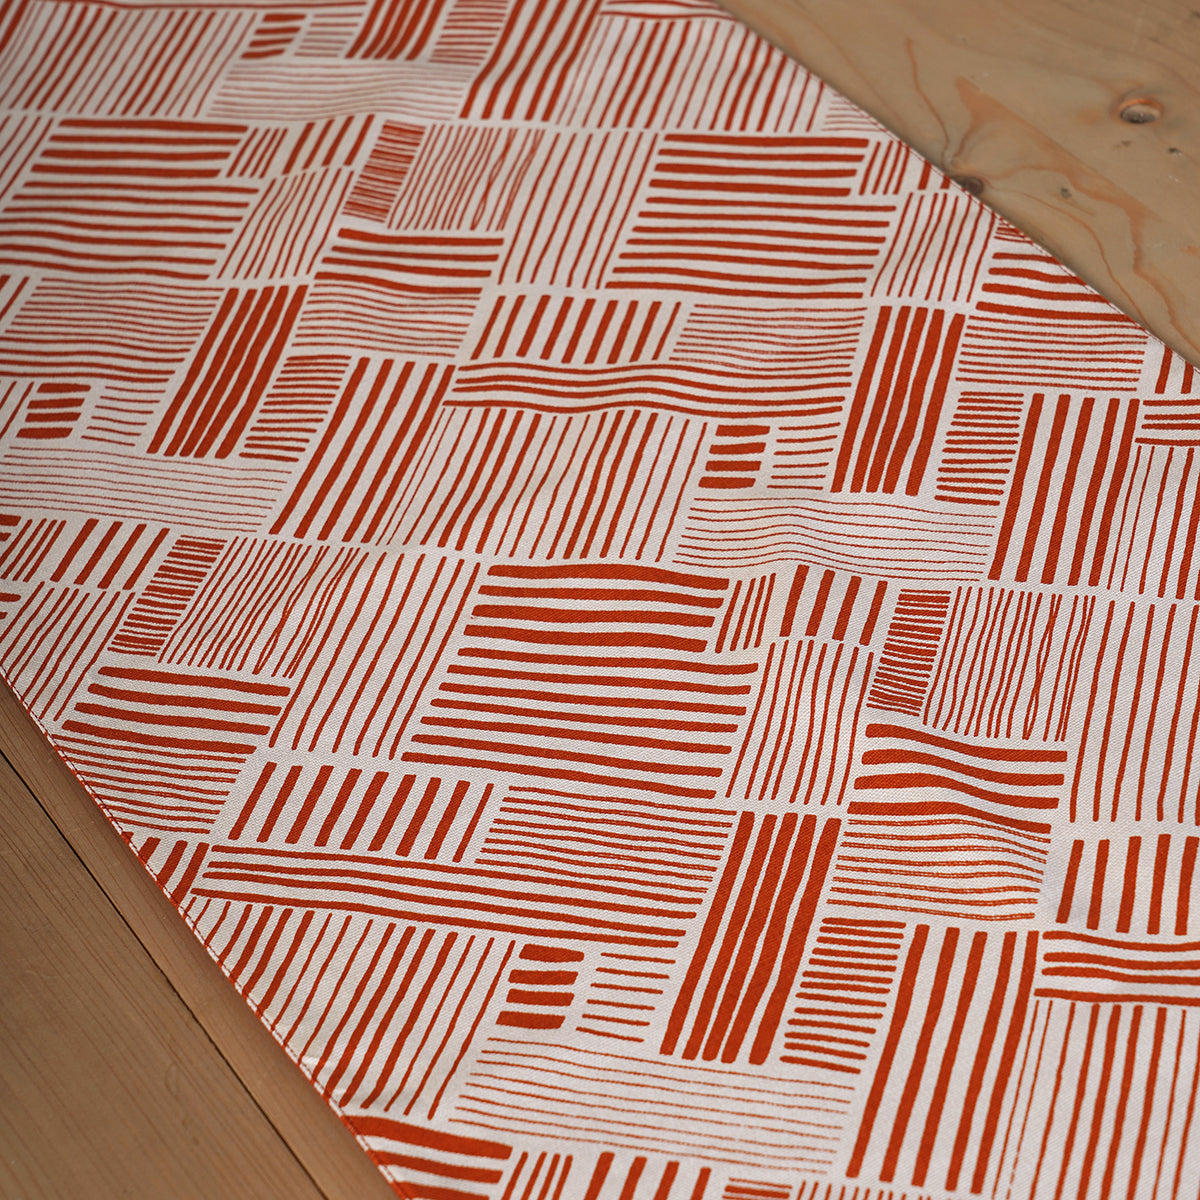 MODERN RETRO - Terracotta cotton Table runner, stripe print with border and embroidery, sizes available